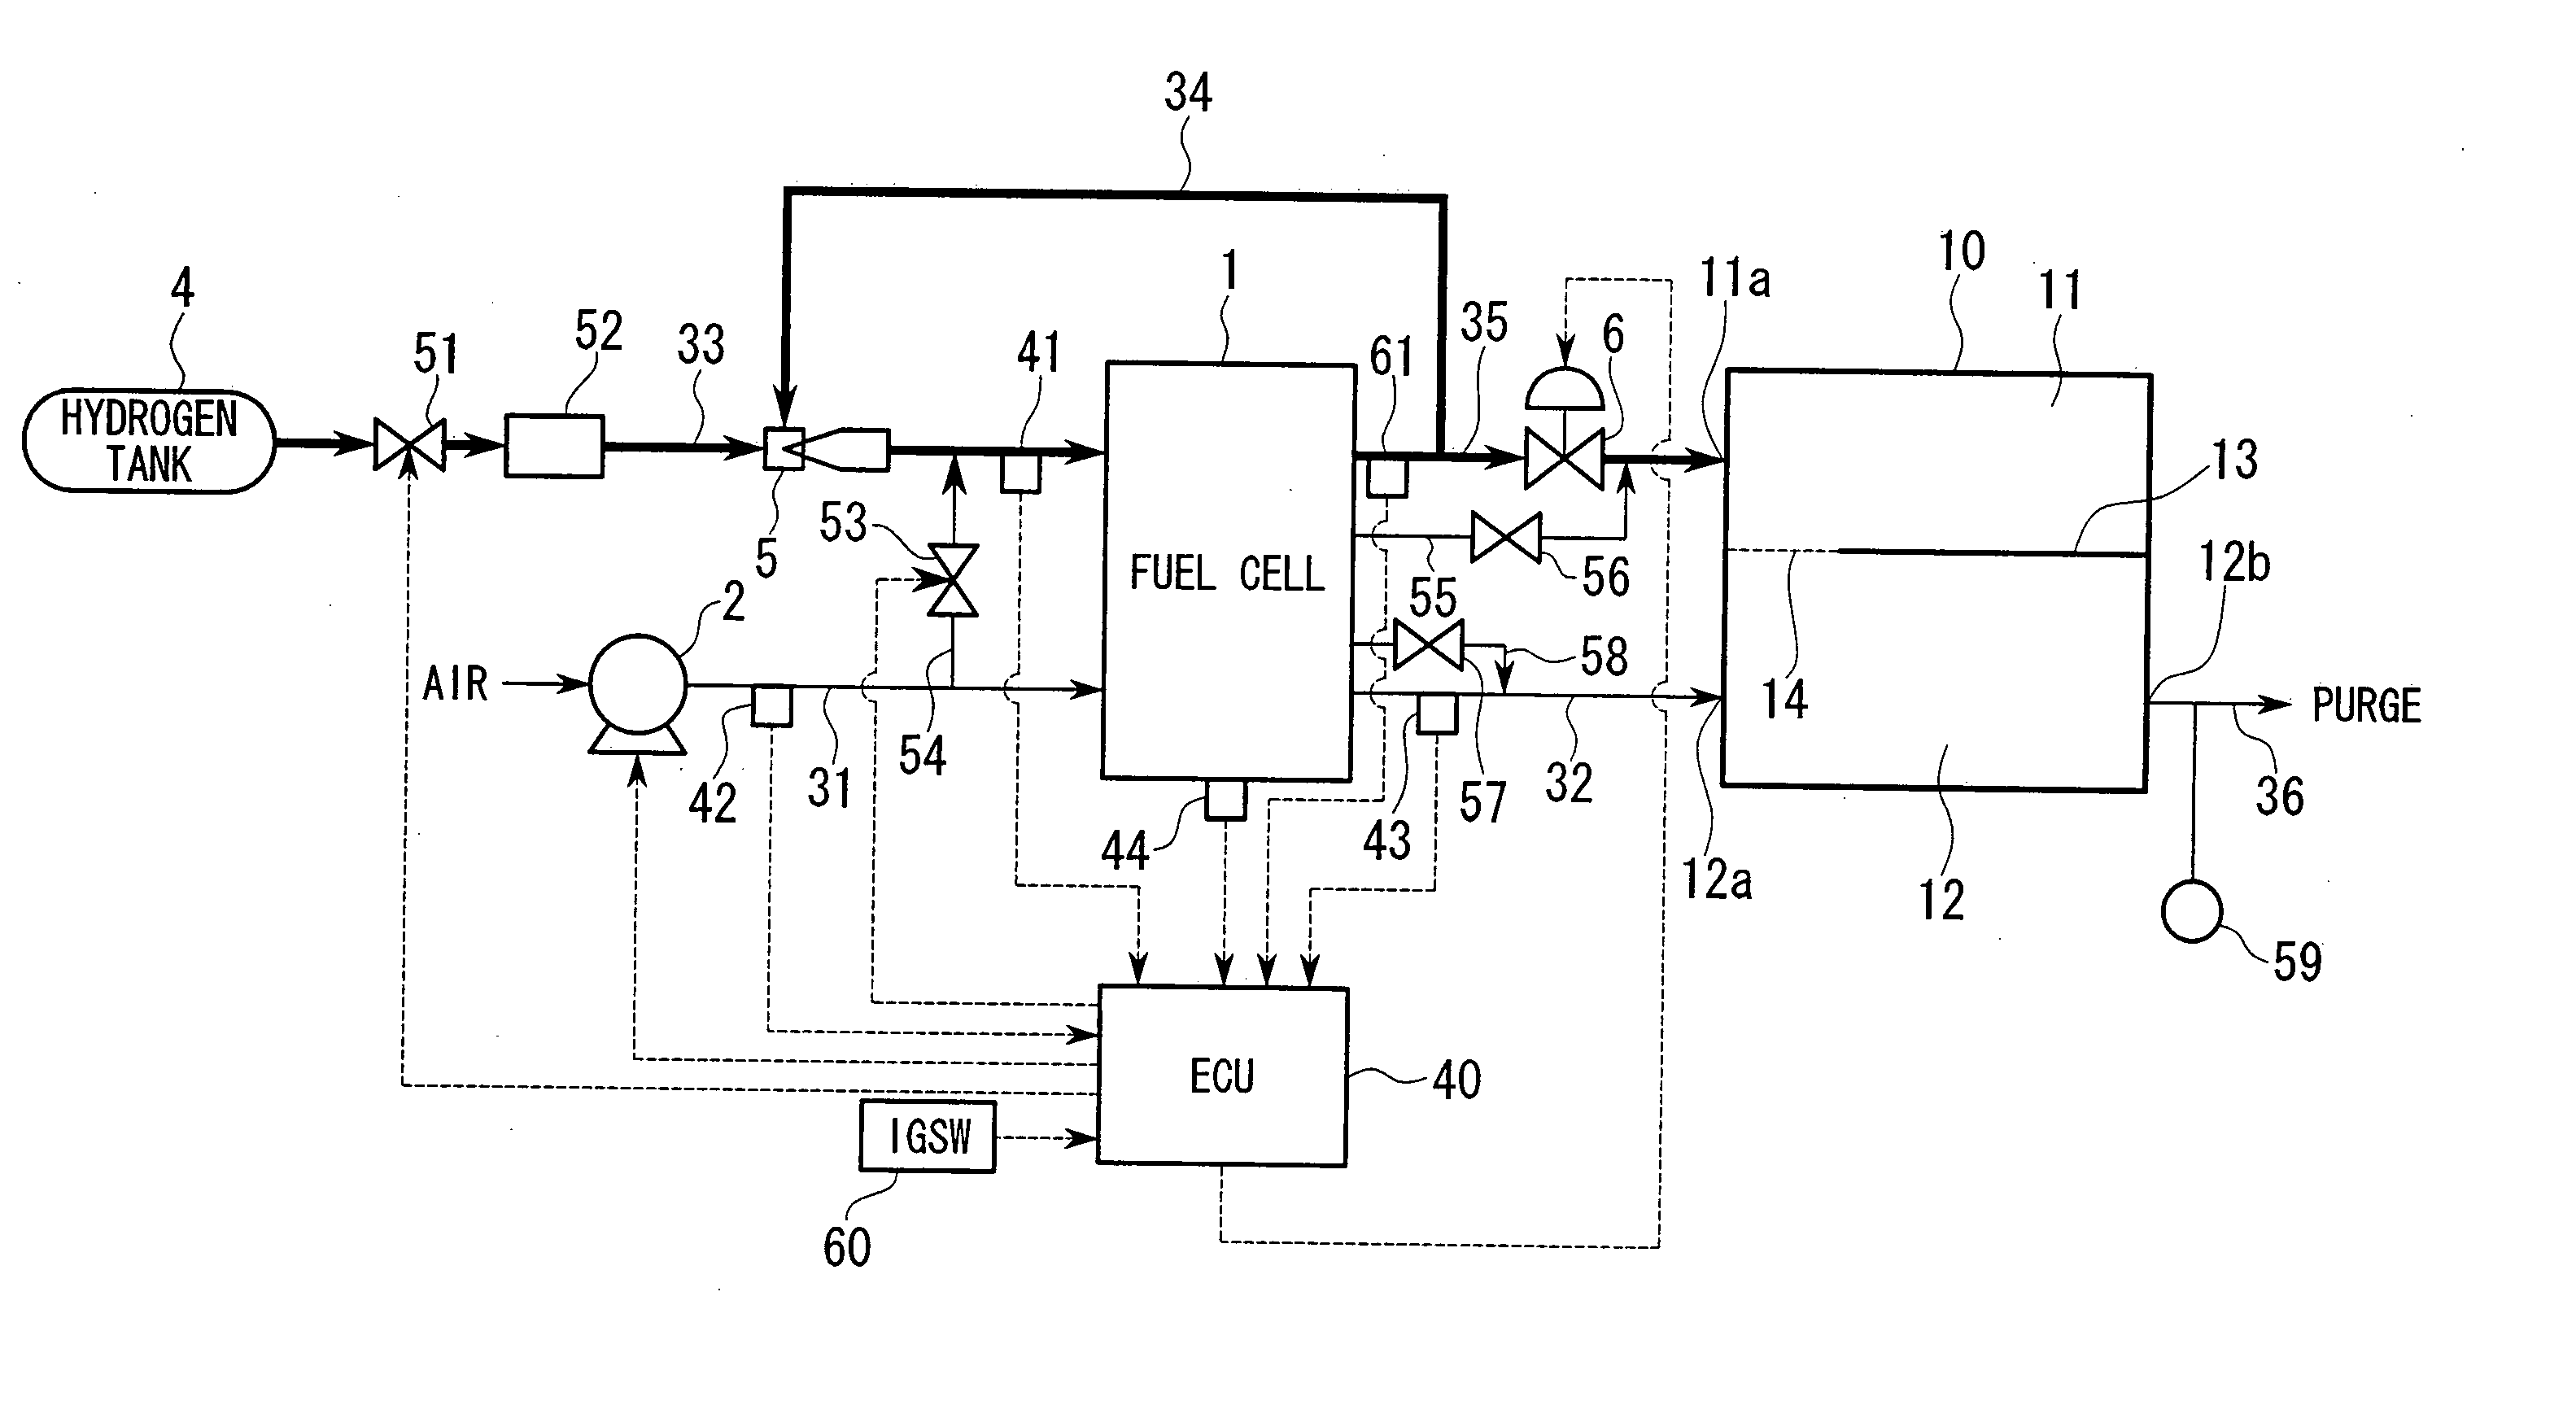 Stop method for fuel cell system